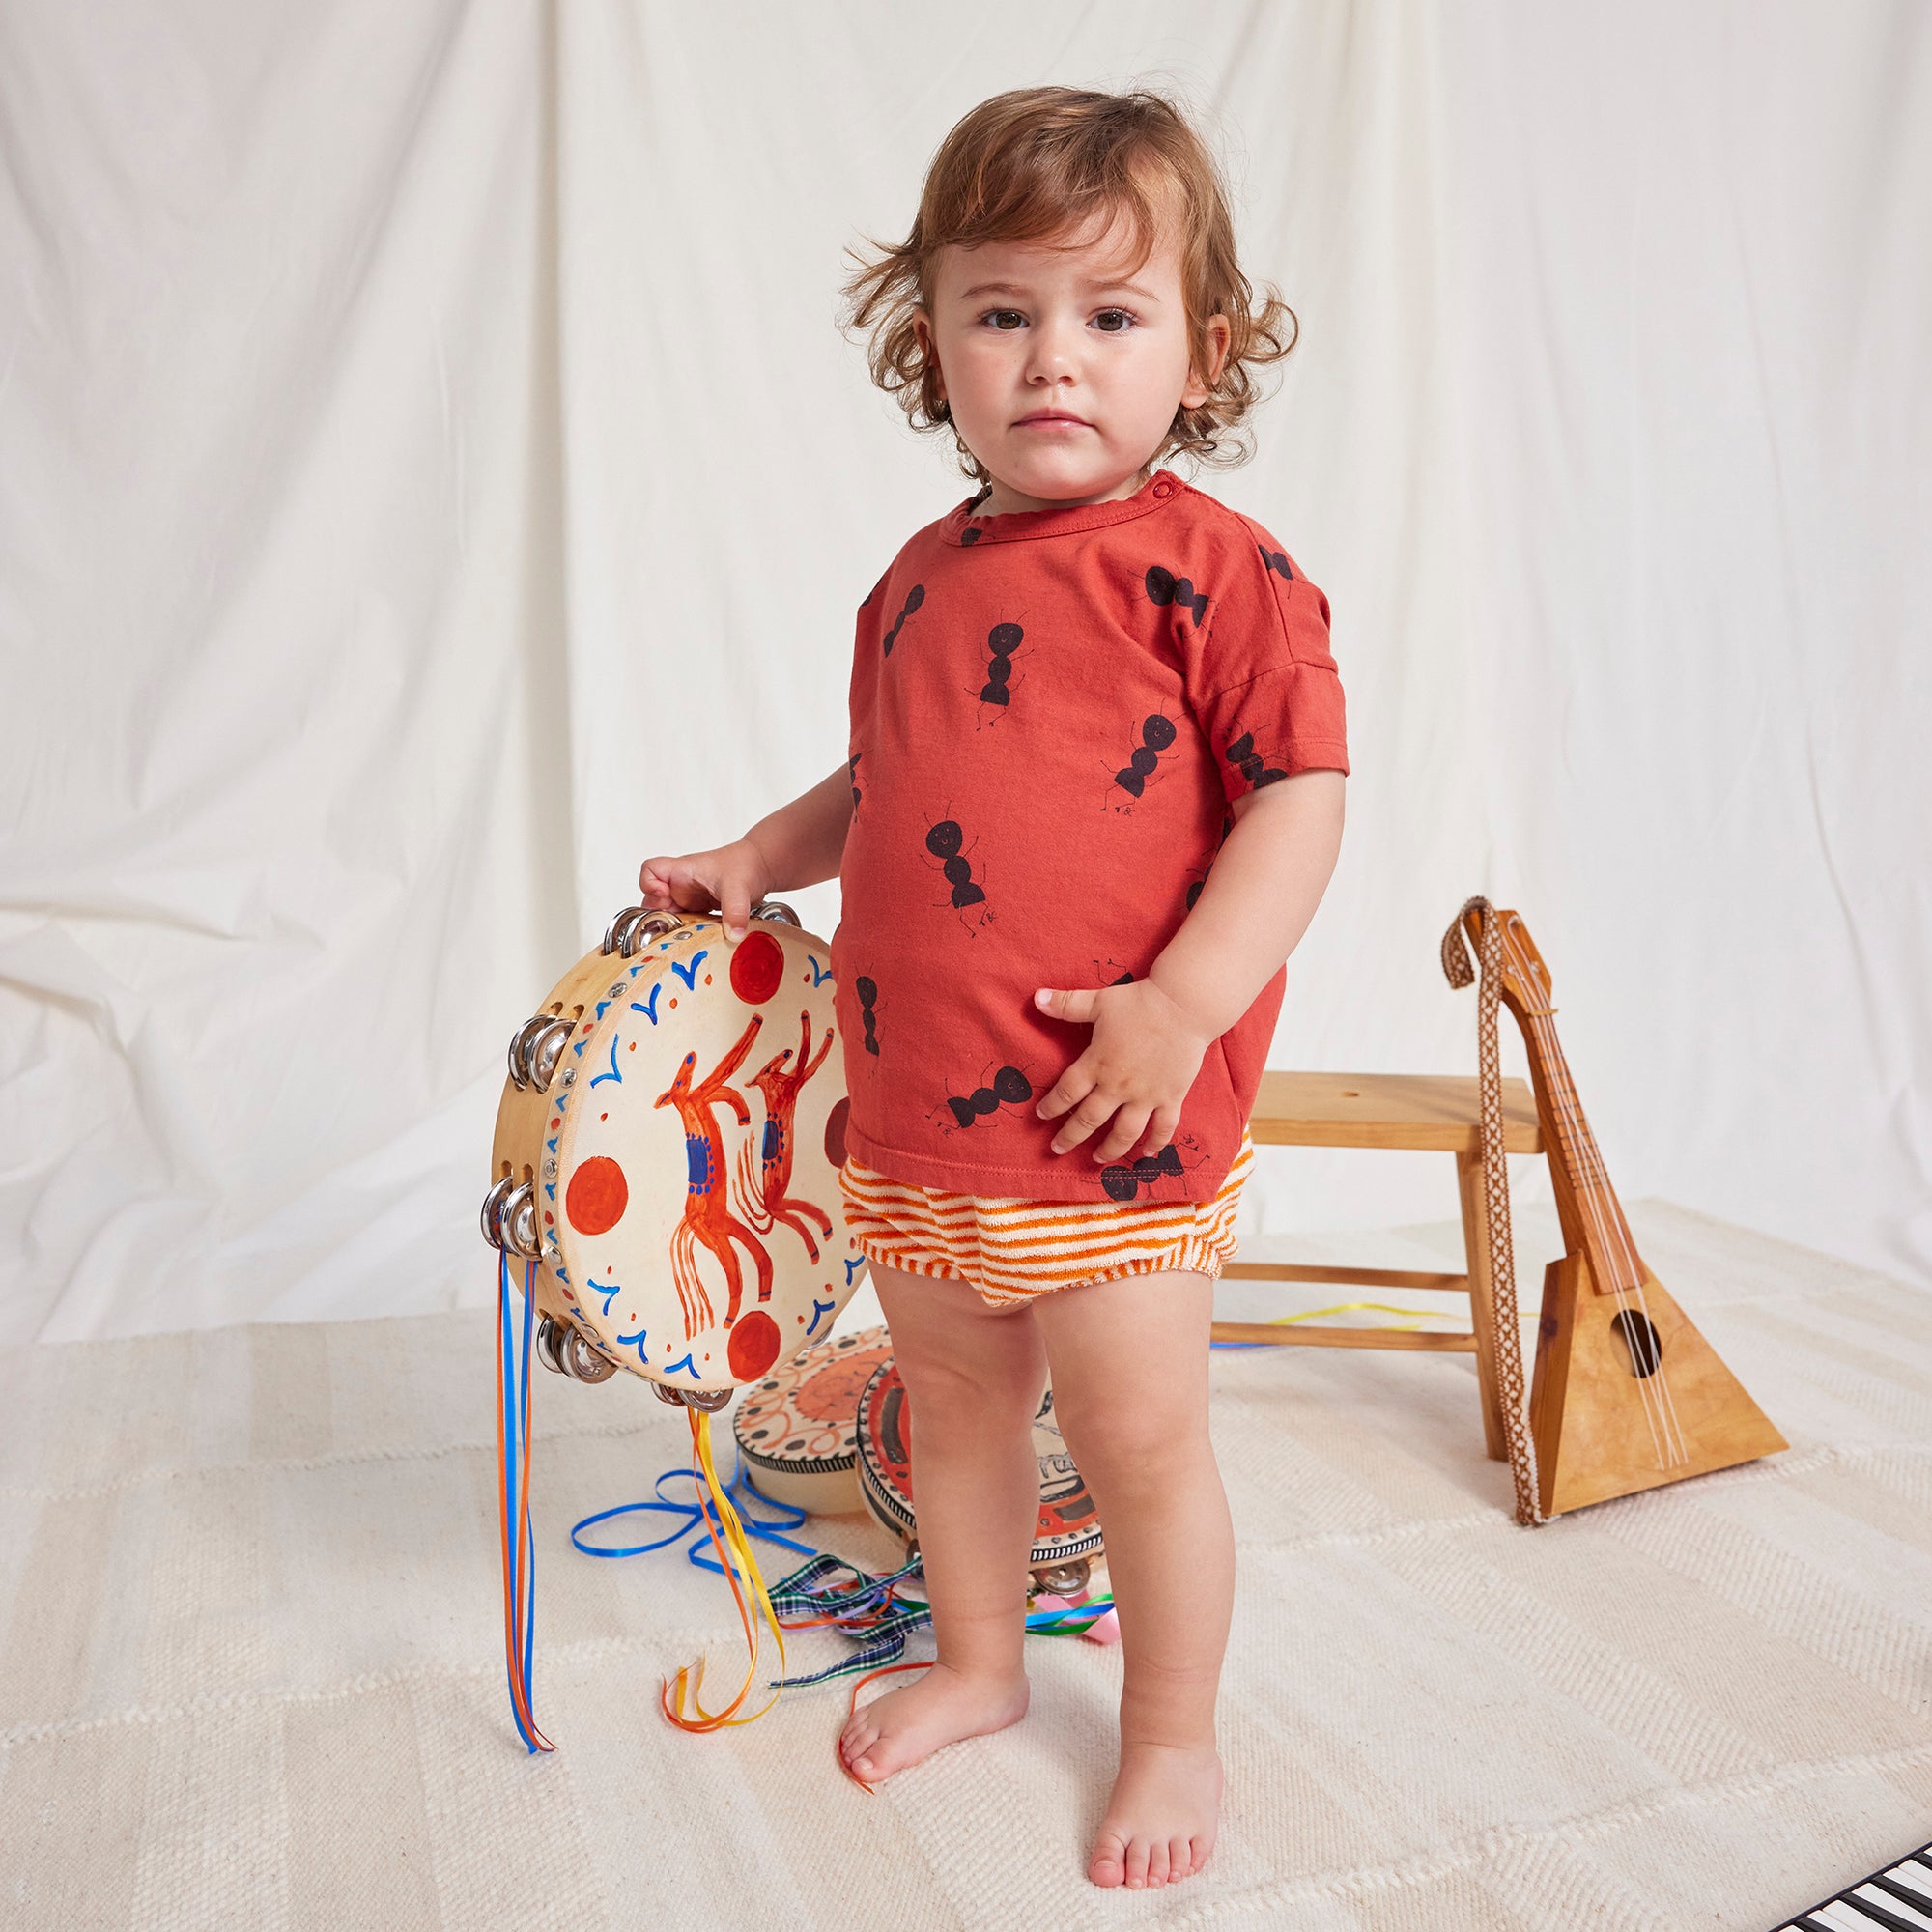 Bobo Choses Baby Ants All Over T-shirt Burgundy Red